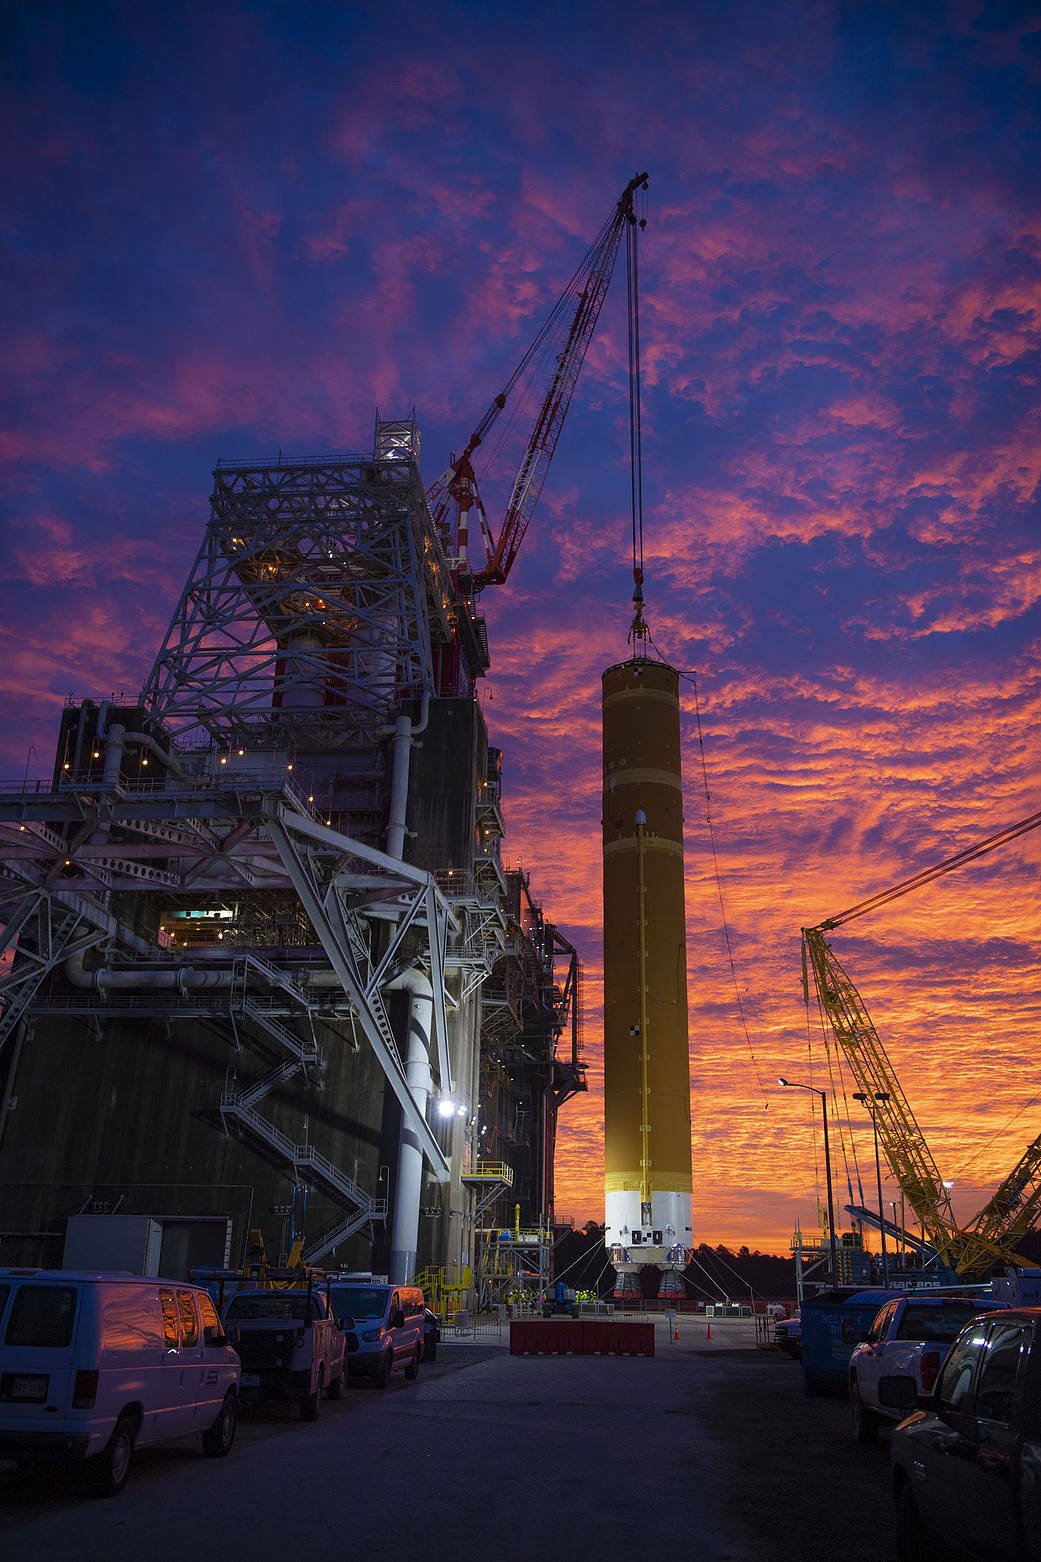 NASA erecting SLS first core stage at Stennis Space Center for testing